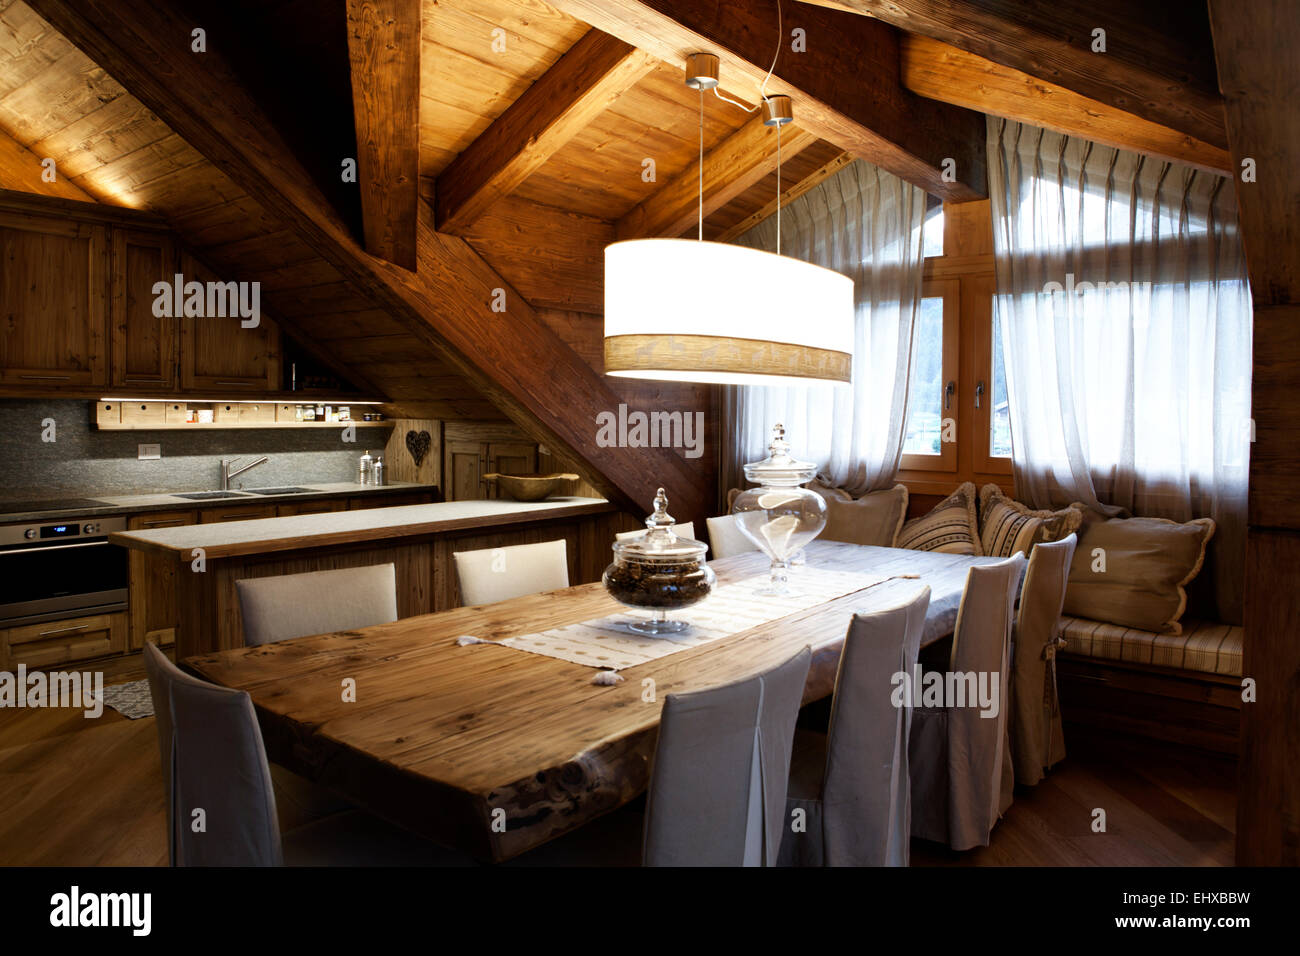 Alpine attic dining room table for eight seats Stock Photo